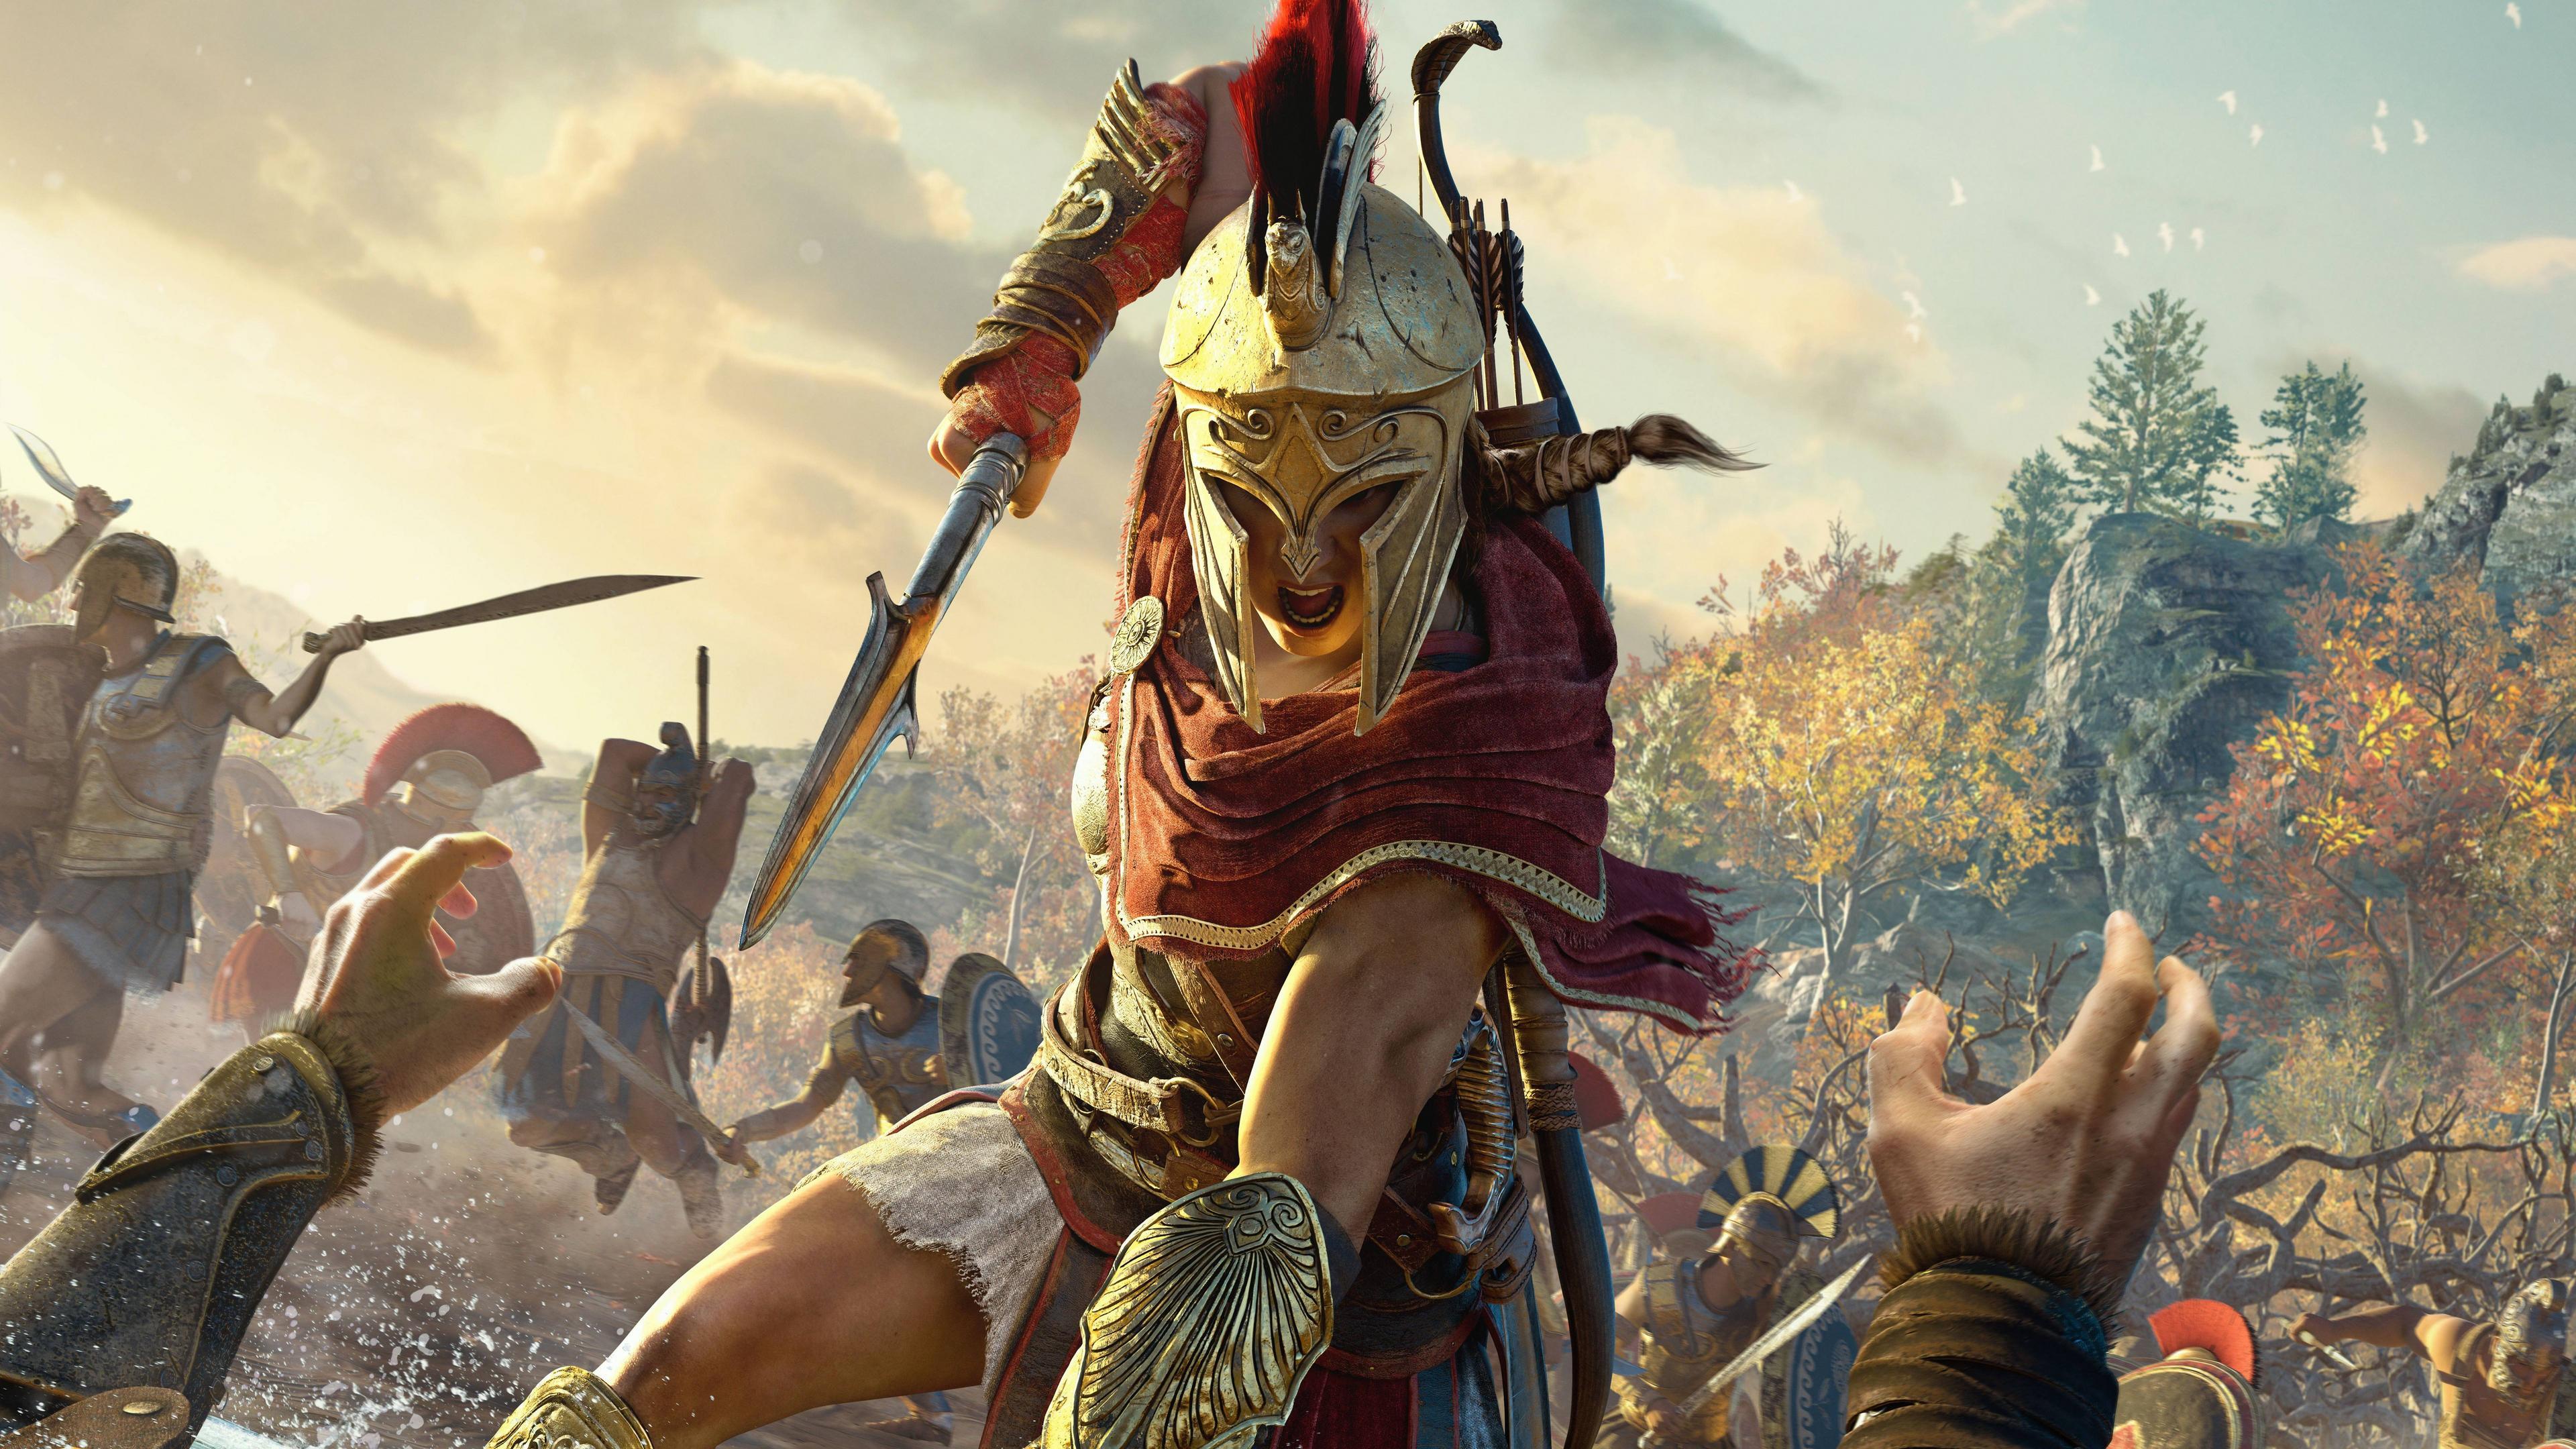 Assassin's Creed Odyssey Game Wallpapers - Wallpaper Cave